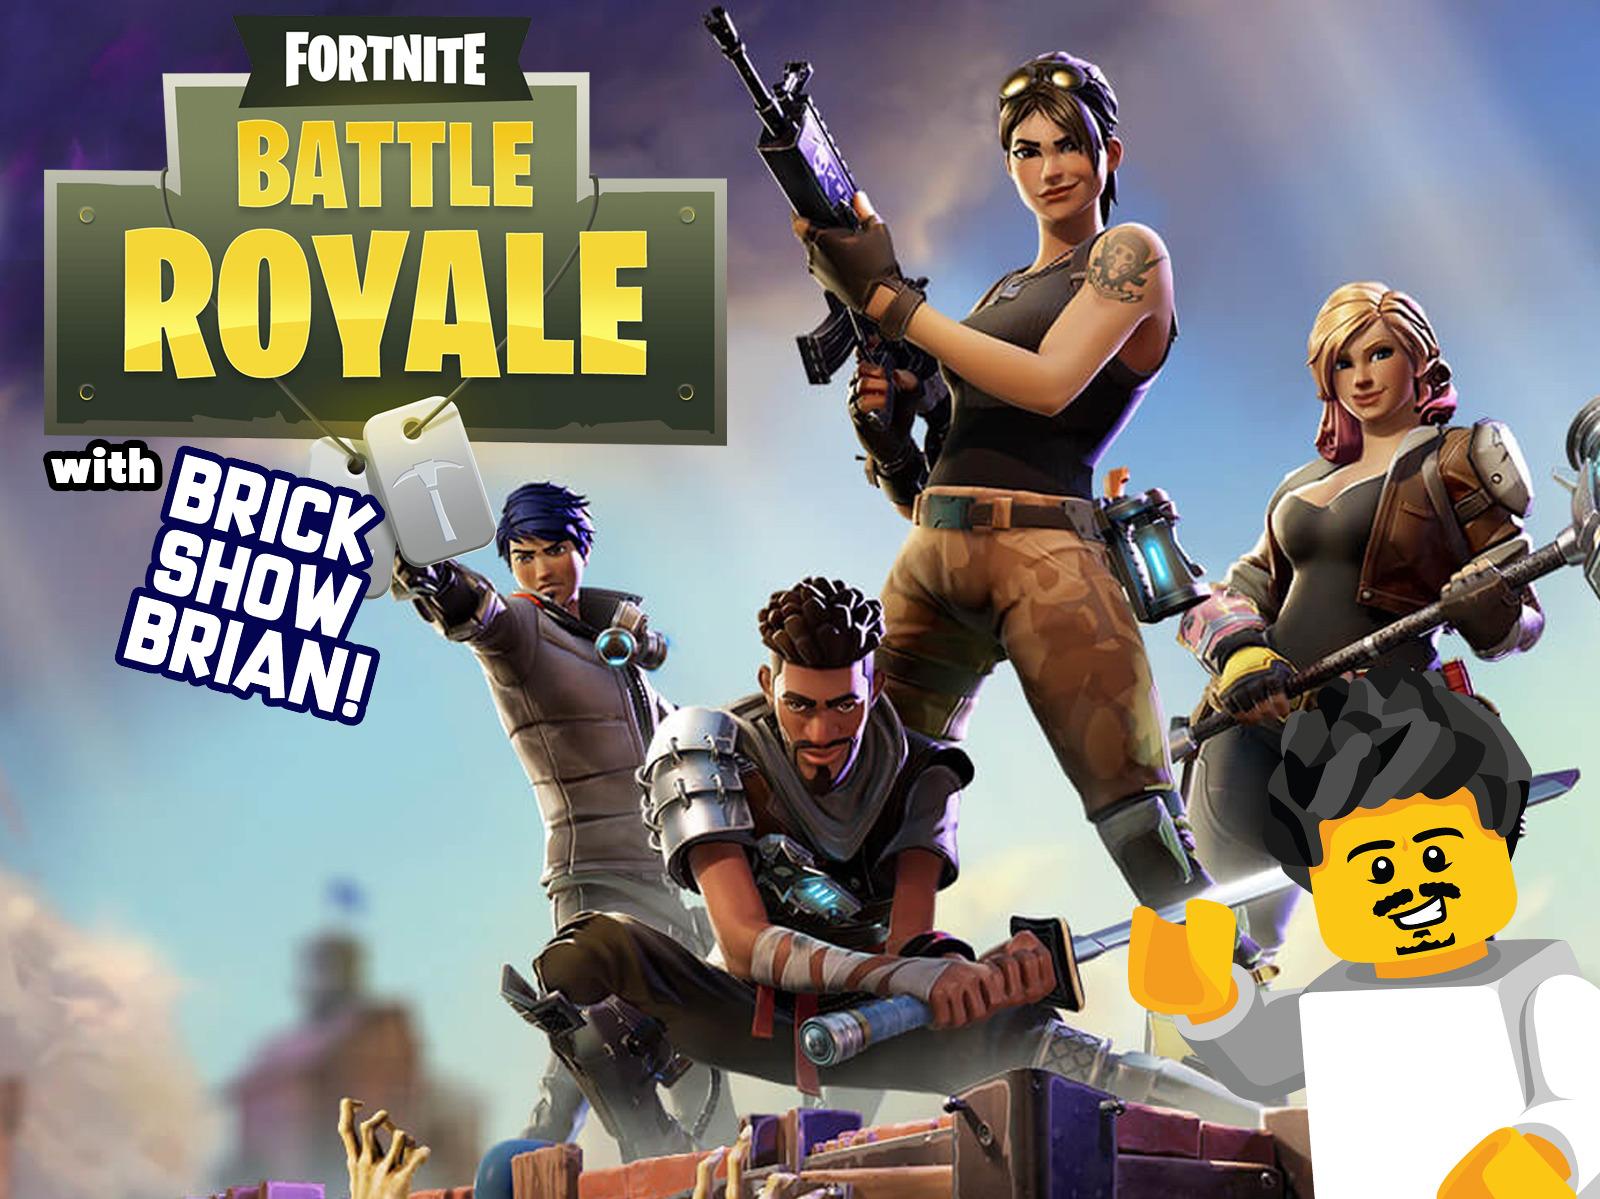 Watch Clip Fortnite Battle Royale With Brick Show Brian Prime Video